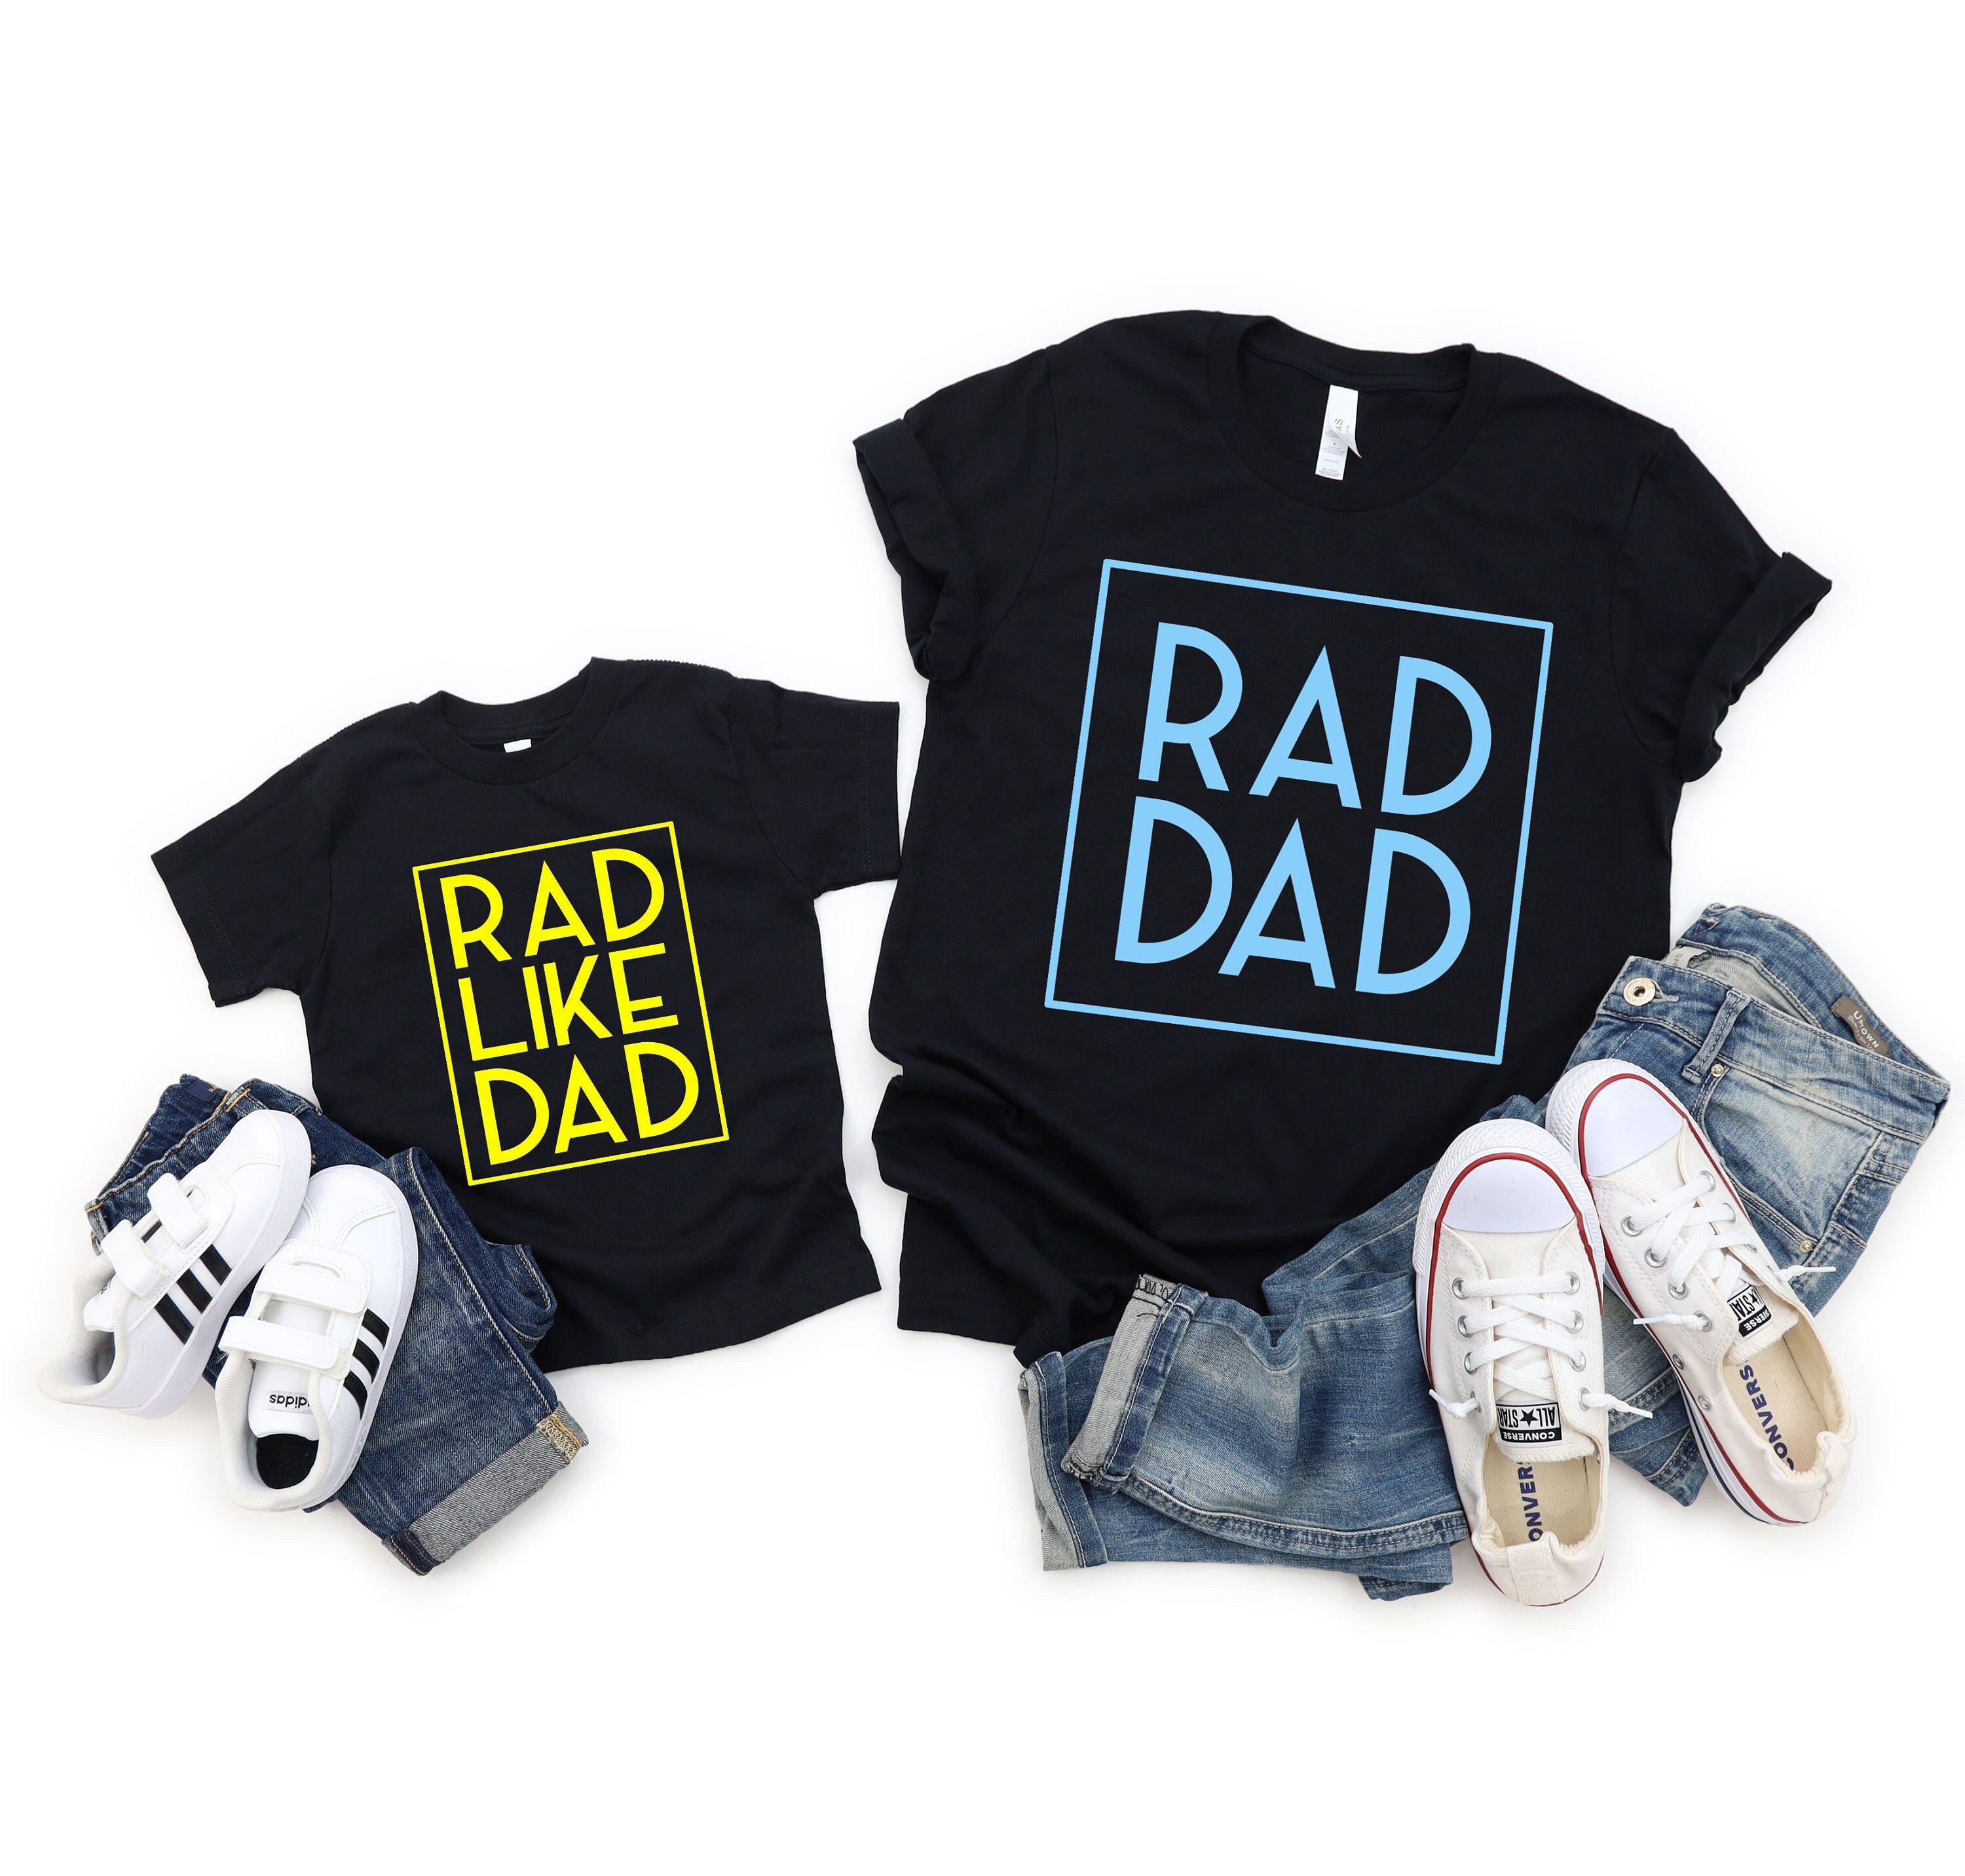 Dad and son shirt set, rad dad shirt, rad like dad shirt, daddy and me matching shirts, fathers day gift for dad and baby shirt set